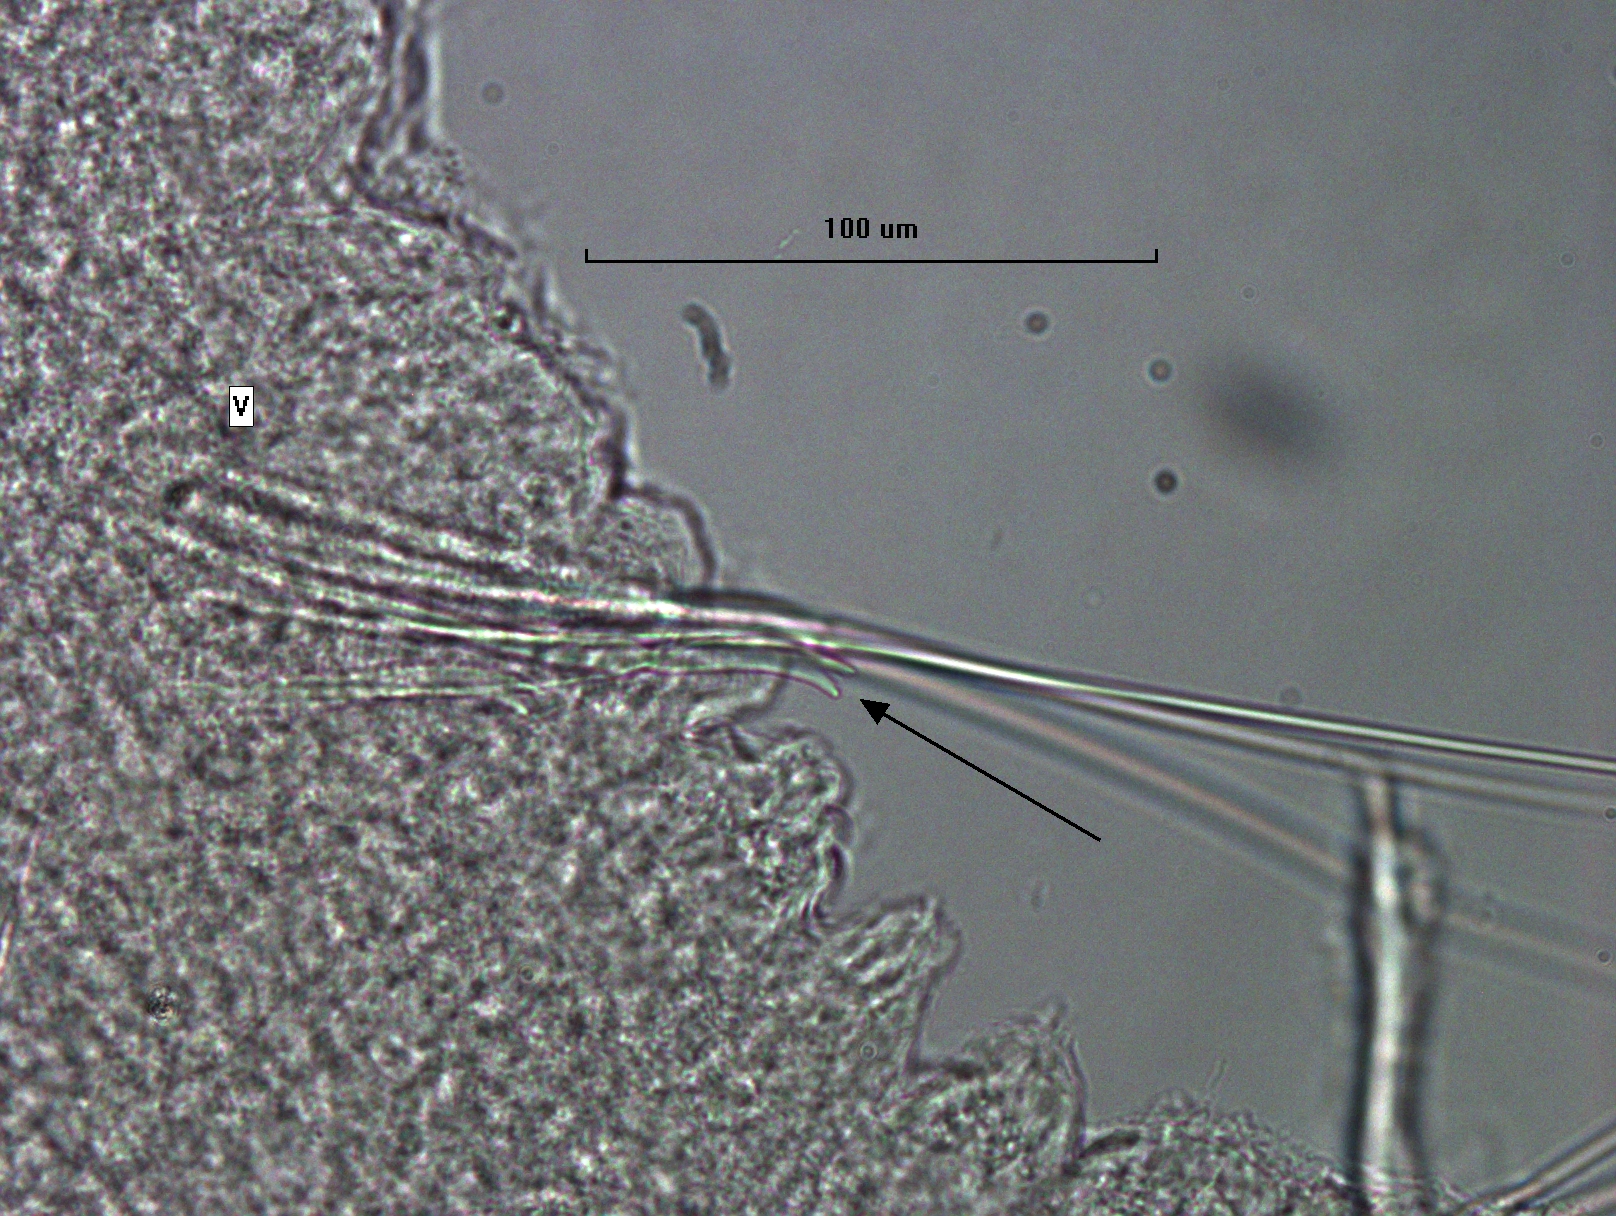 Photomicrograph of worm chaetae showing a combination of long thin hairs and chaetae with two large teeth and minute pectinations inbetween.